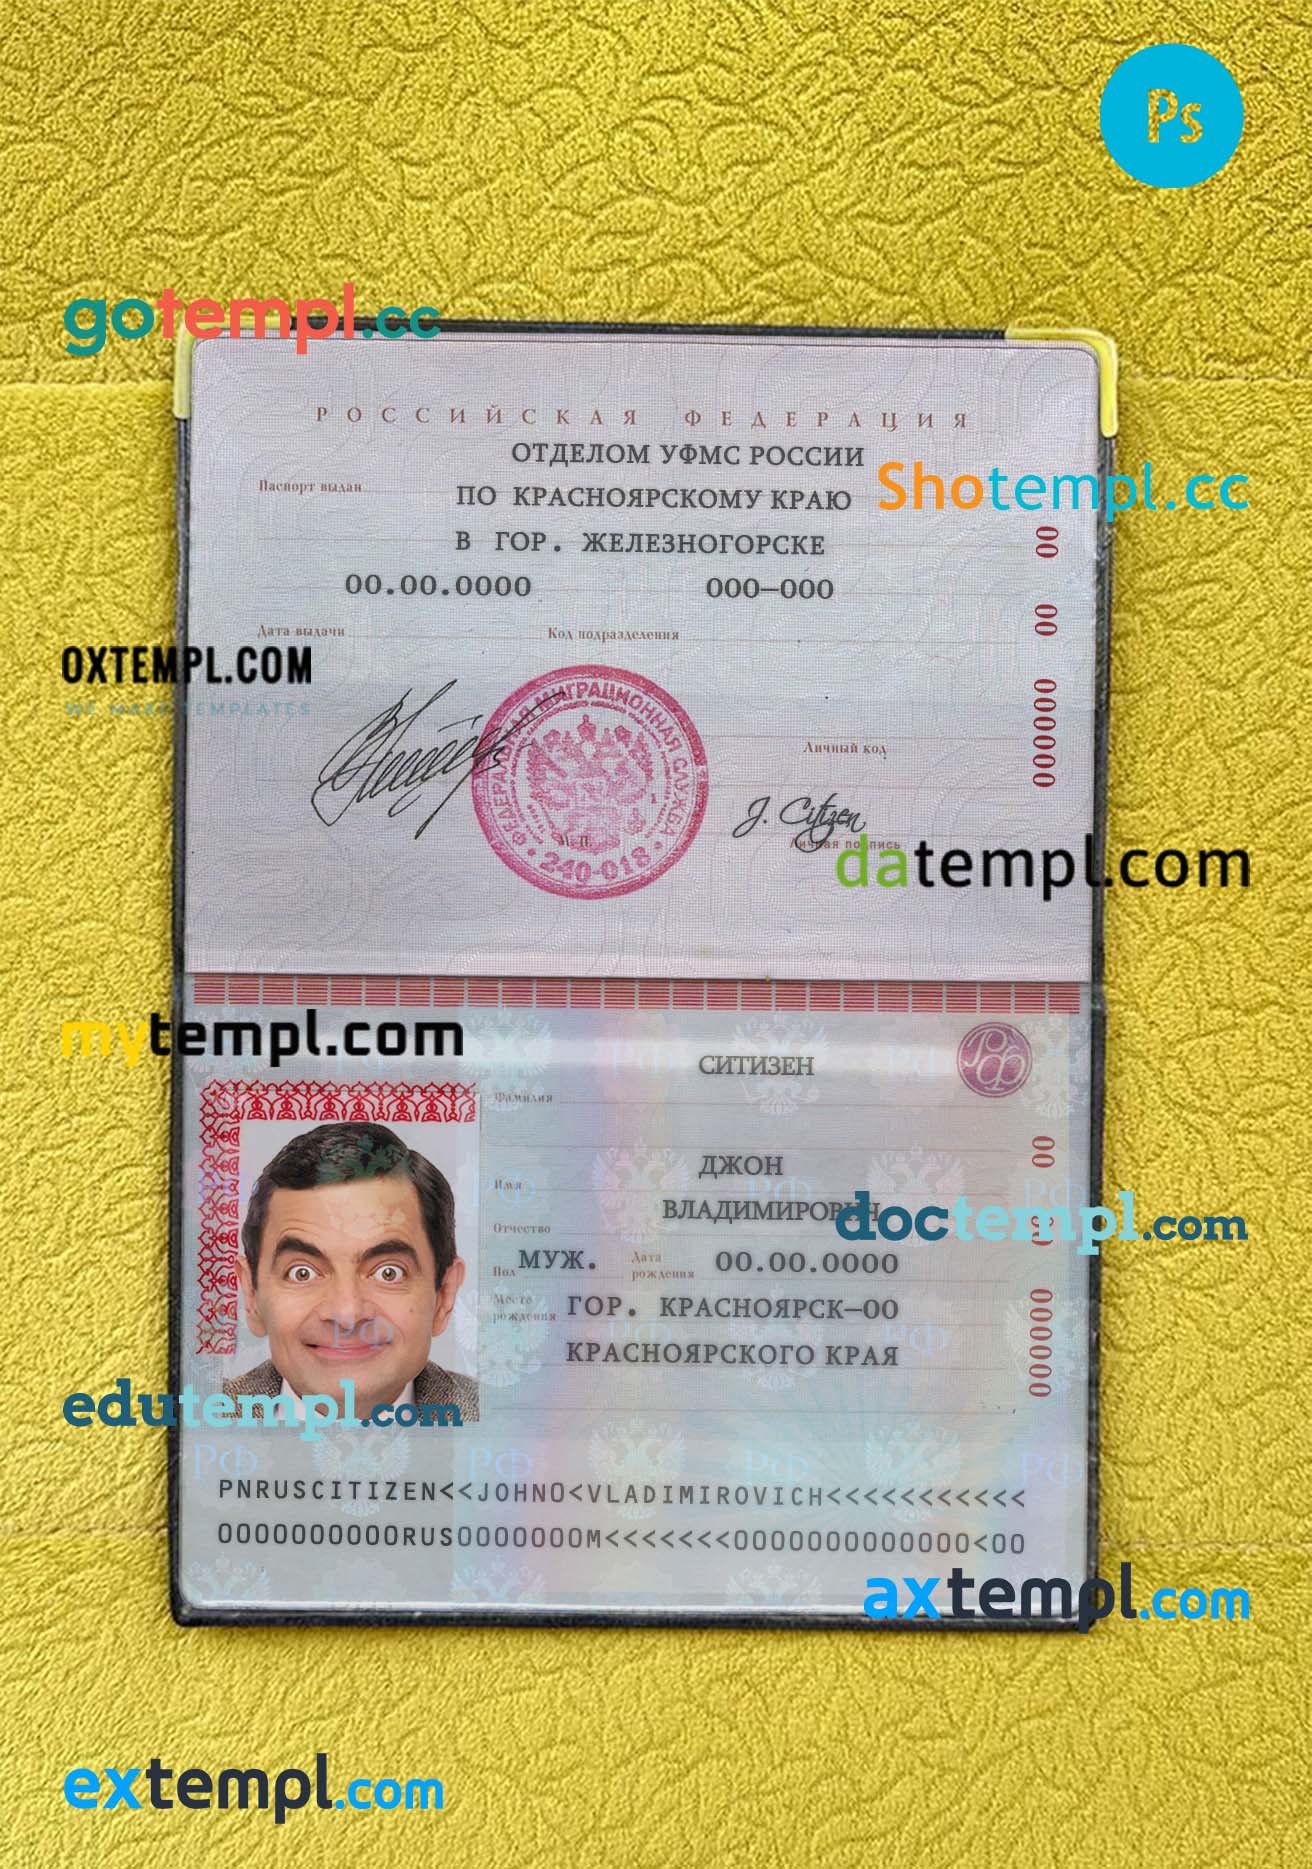 Russia Standard passport PSD files, scan and photo look templates, 2 in 1